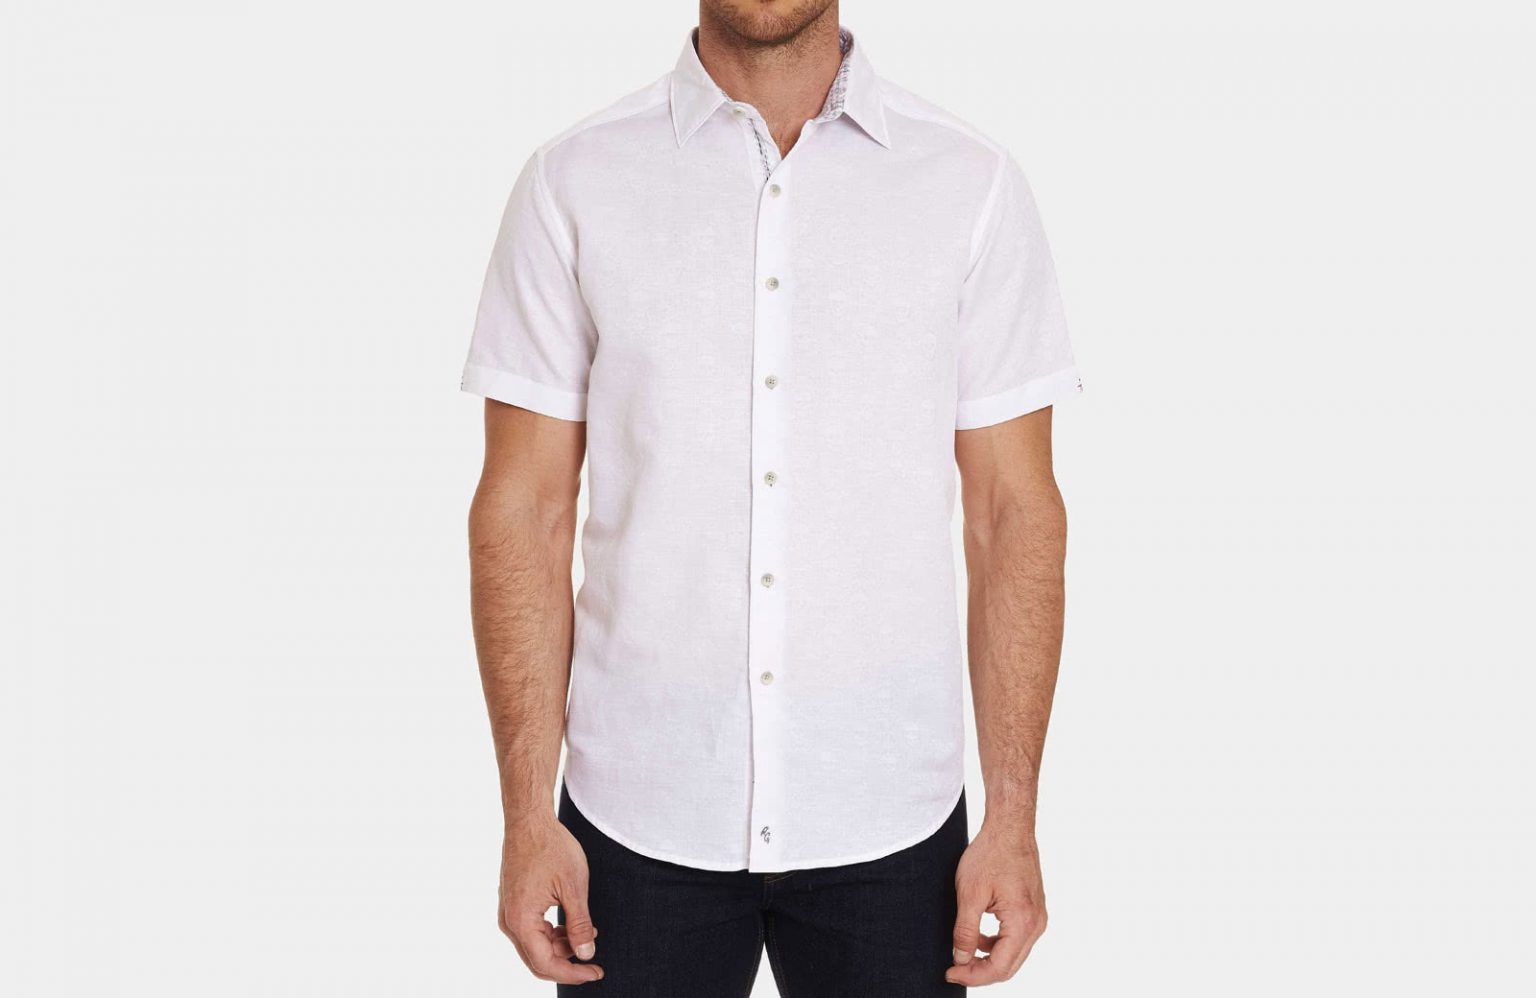 15 Best Men Designer Shirts From Robert Graham To Stand Out